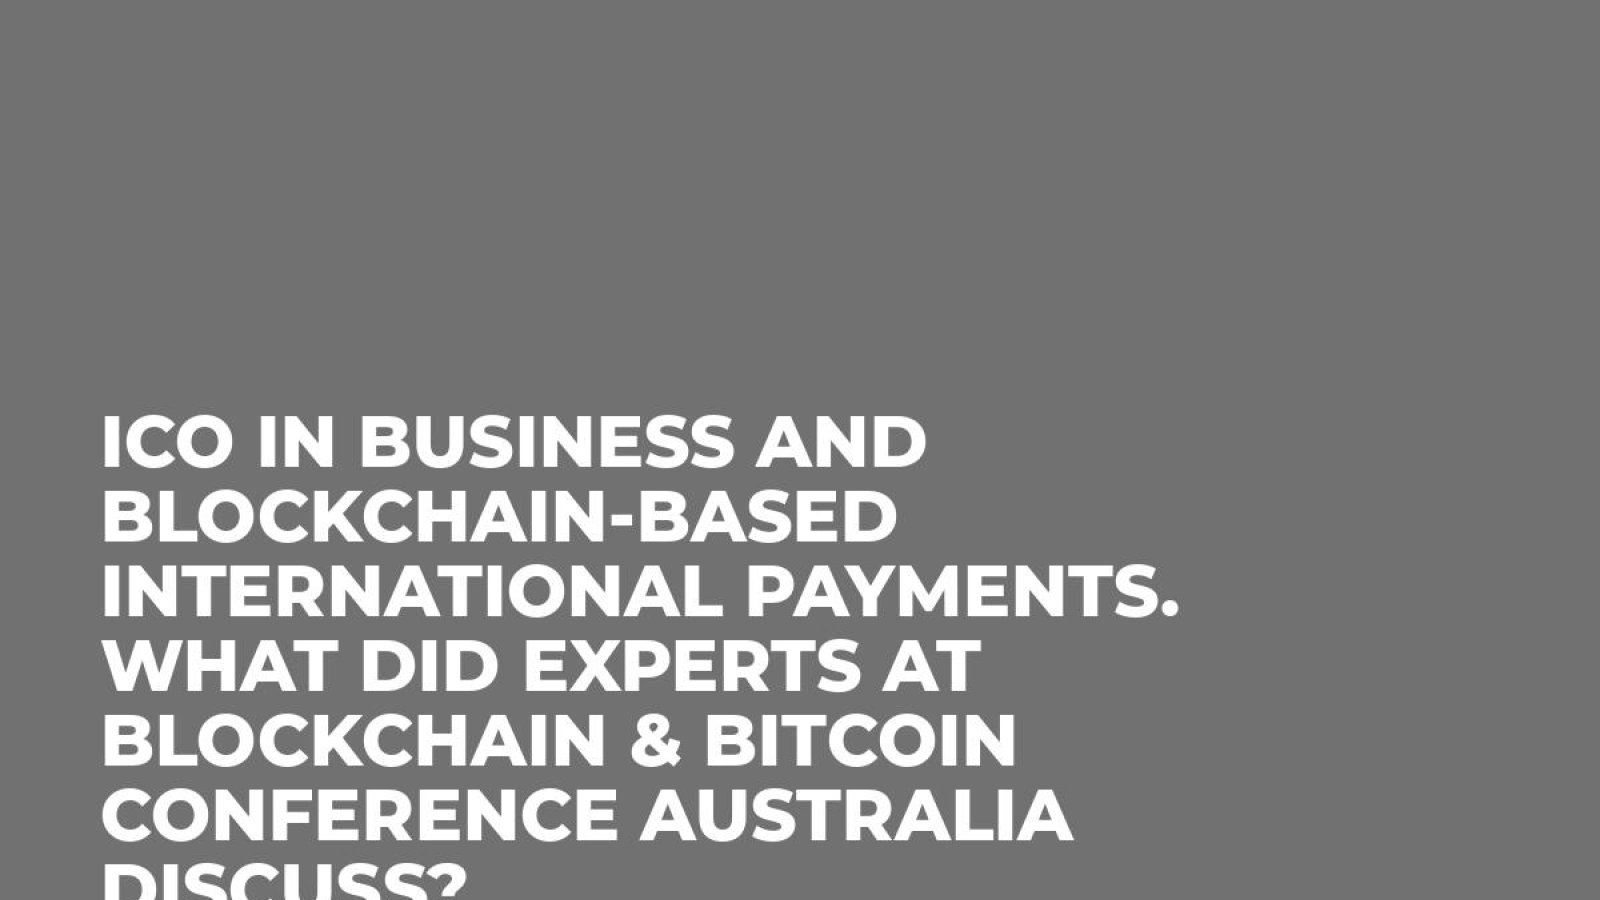 ICO in business and blockchain-based international payments. What did experts at Blockchain & Bitcoin Conference Australia discuss?